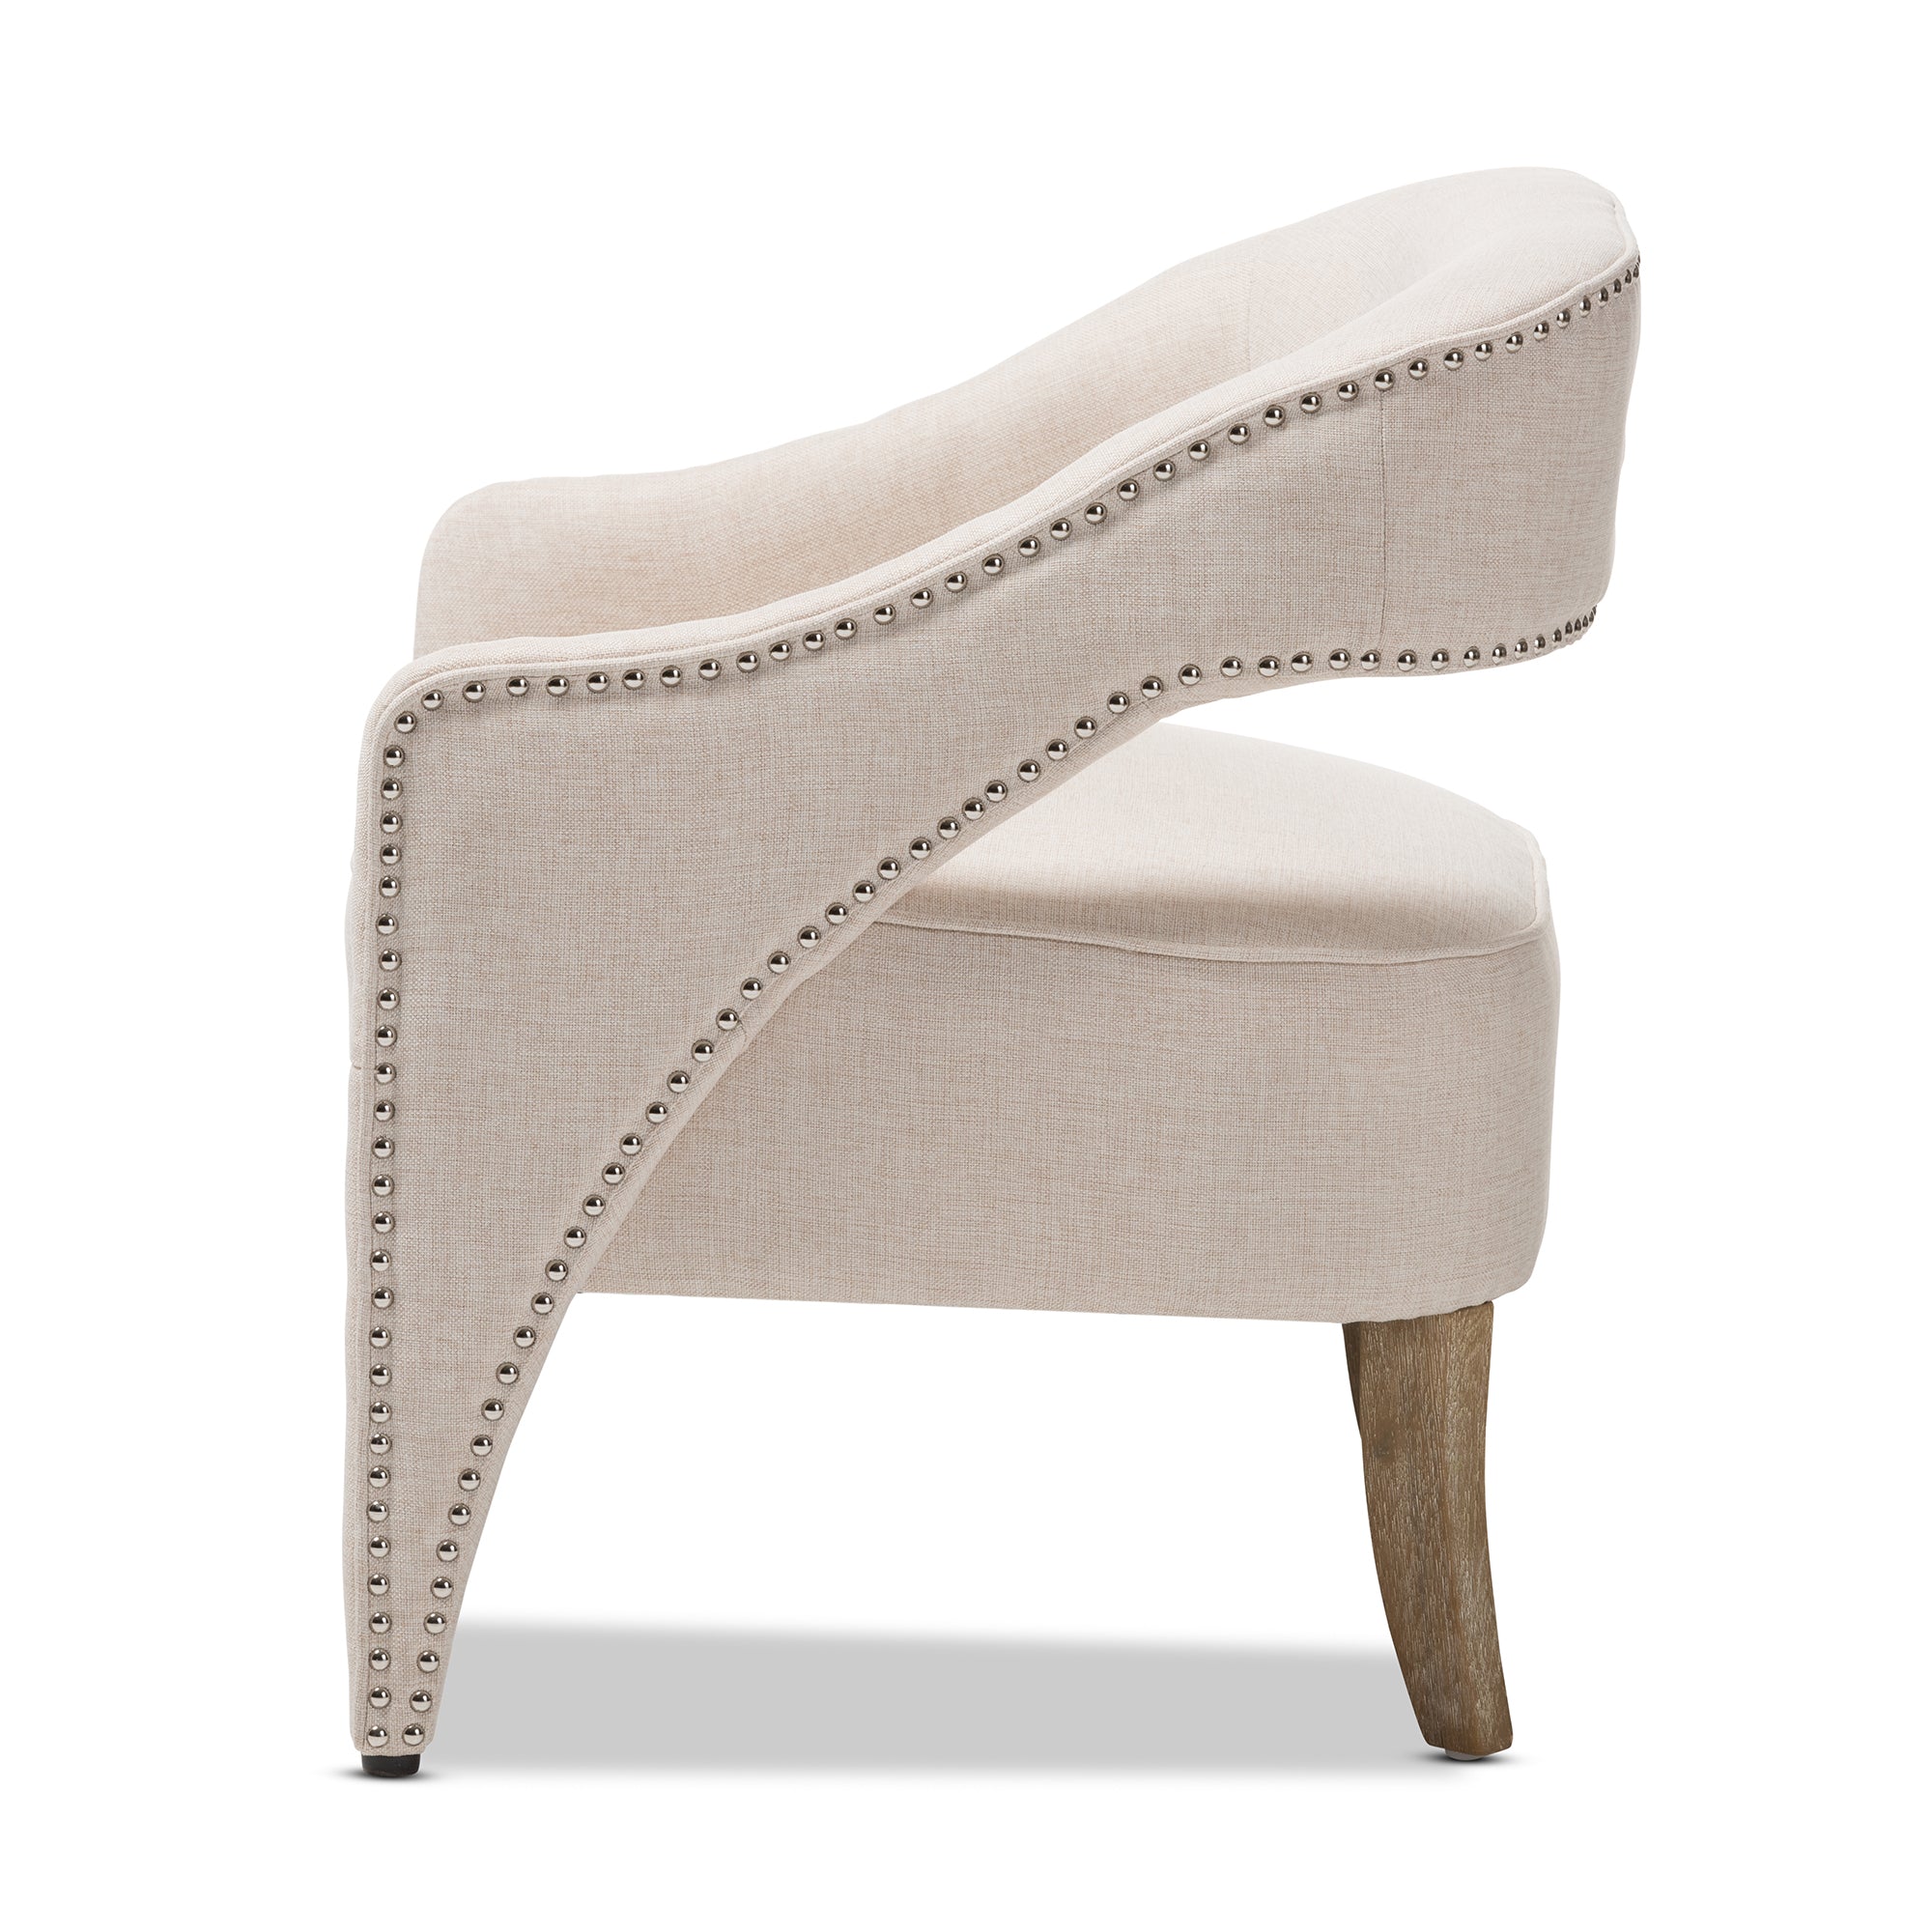 Floriane Contemporary Living Room Chair-Chair-Baxton Studio - WI-Wall2Wall Furnishings